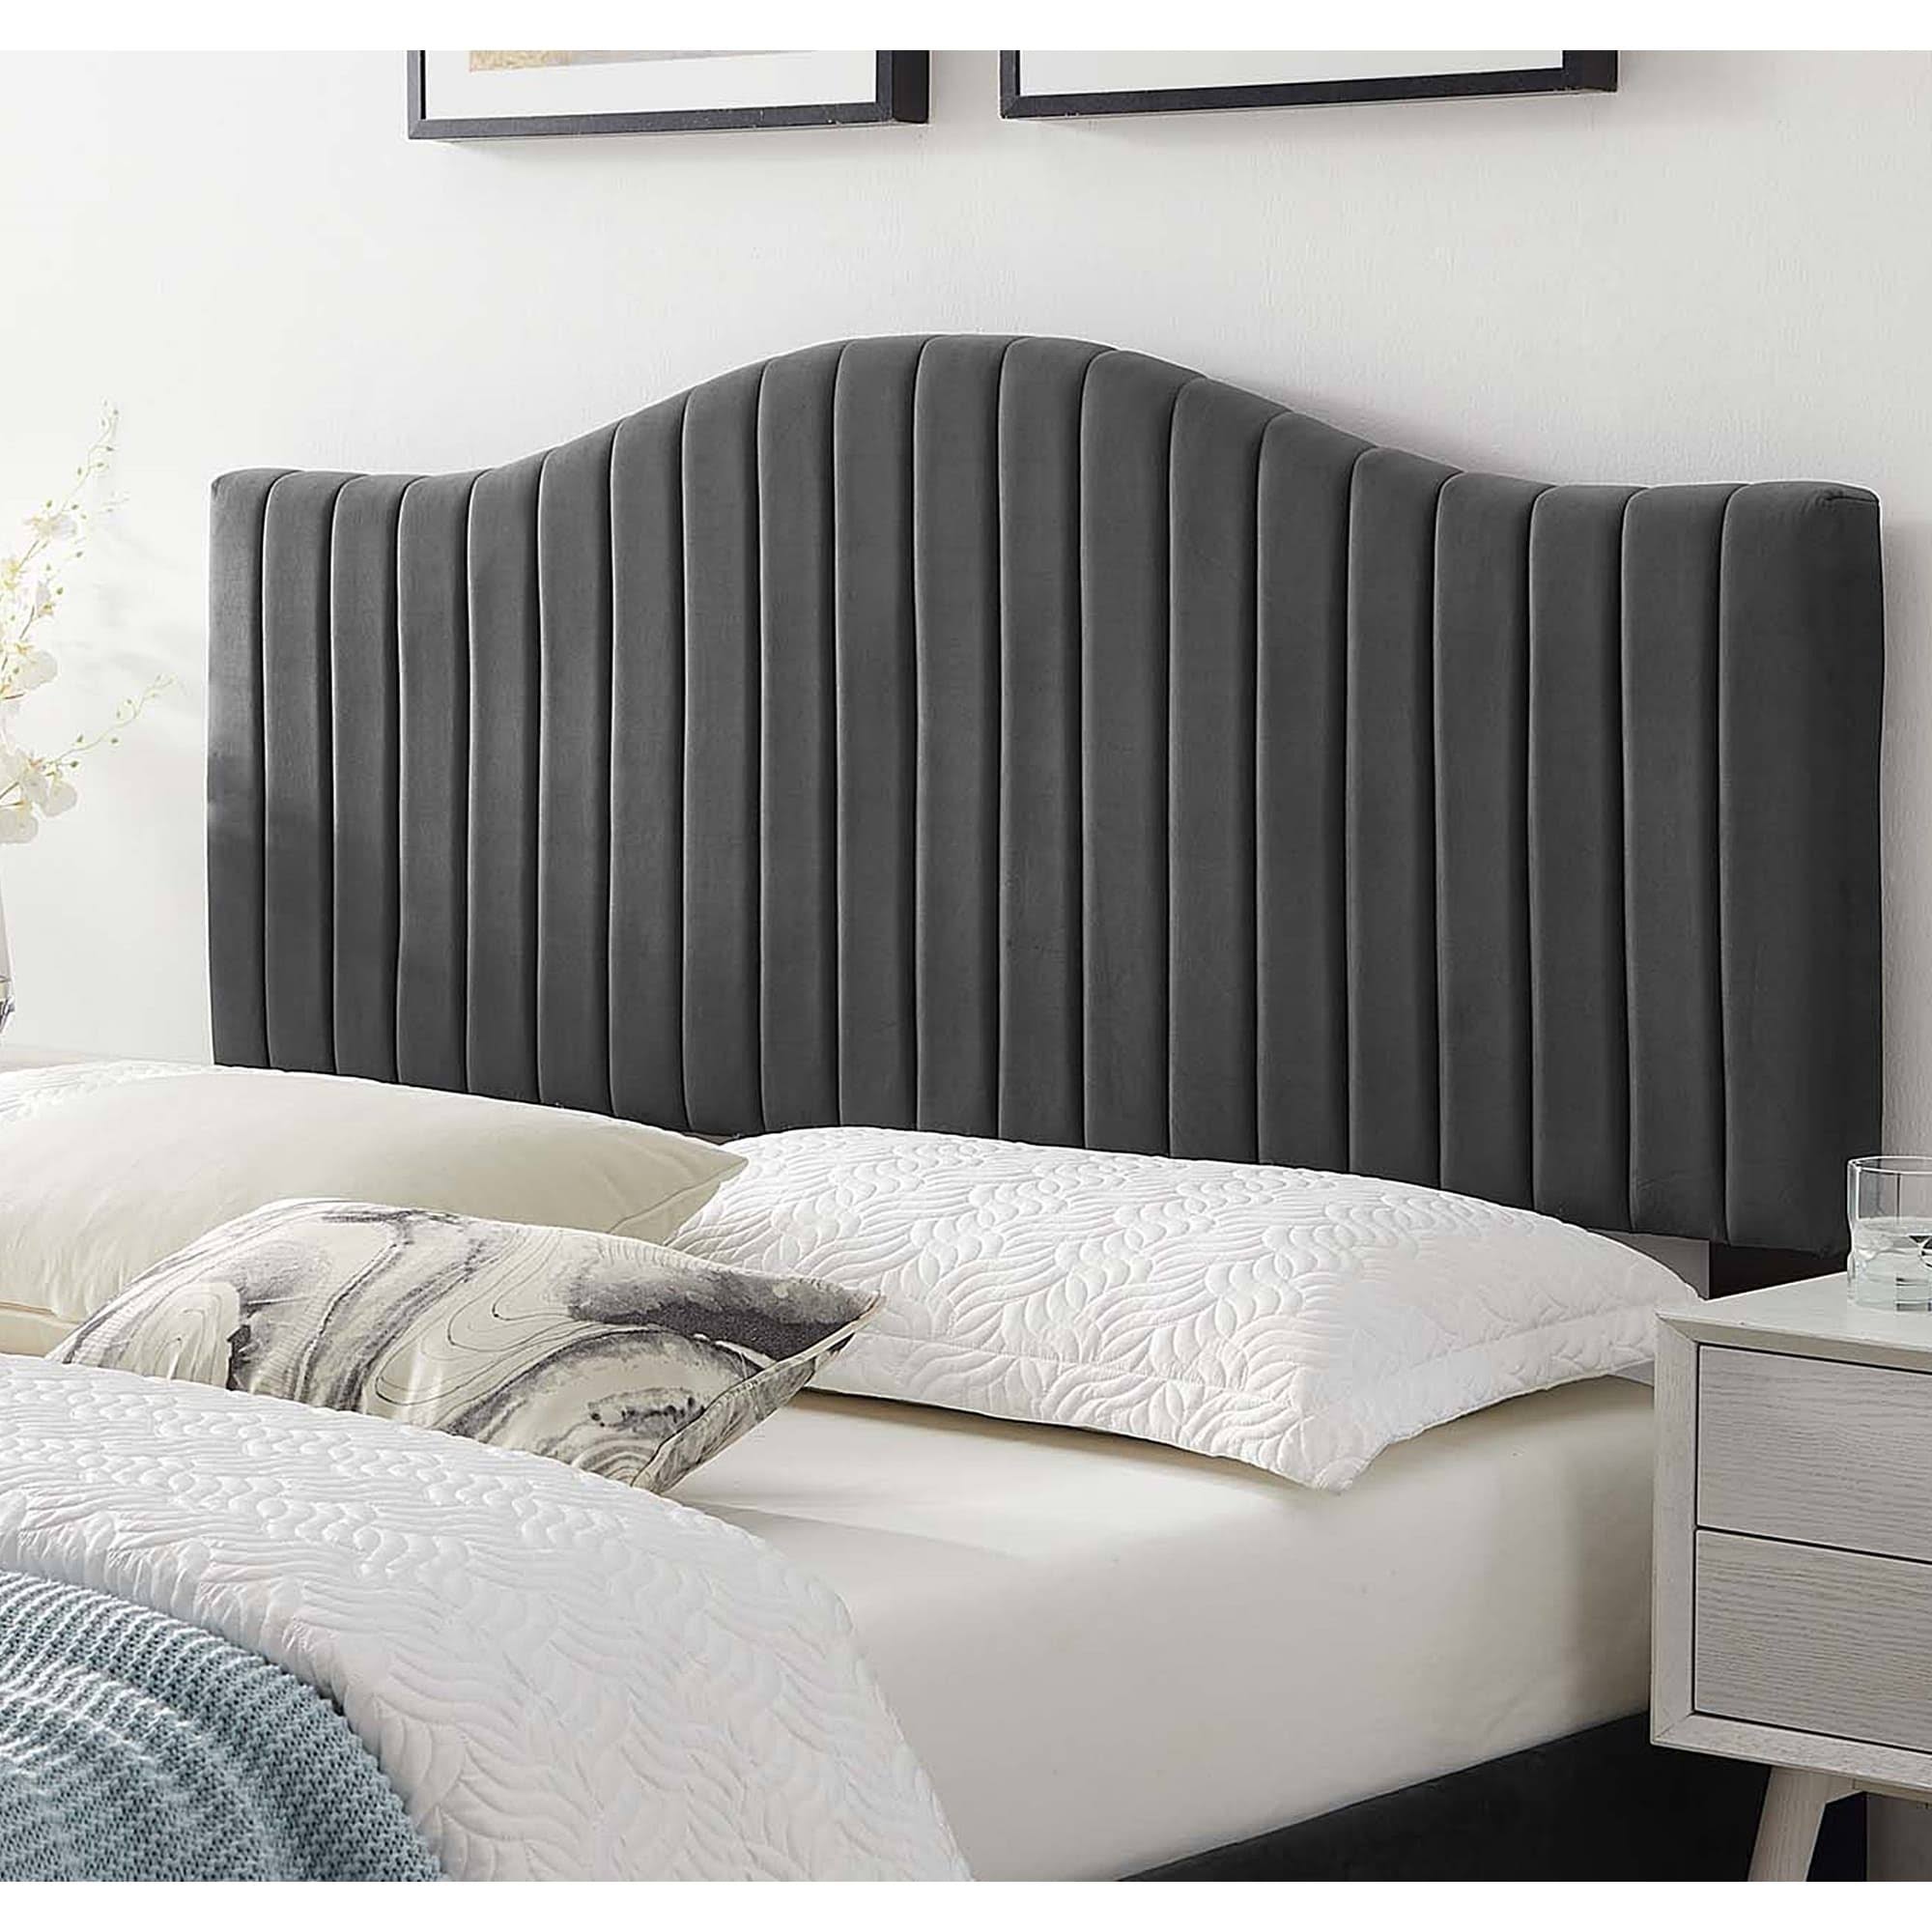 Findlay Arched Charcoal Velvet Upholstered Twin Size Headboard - GZM03-S